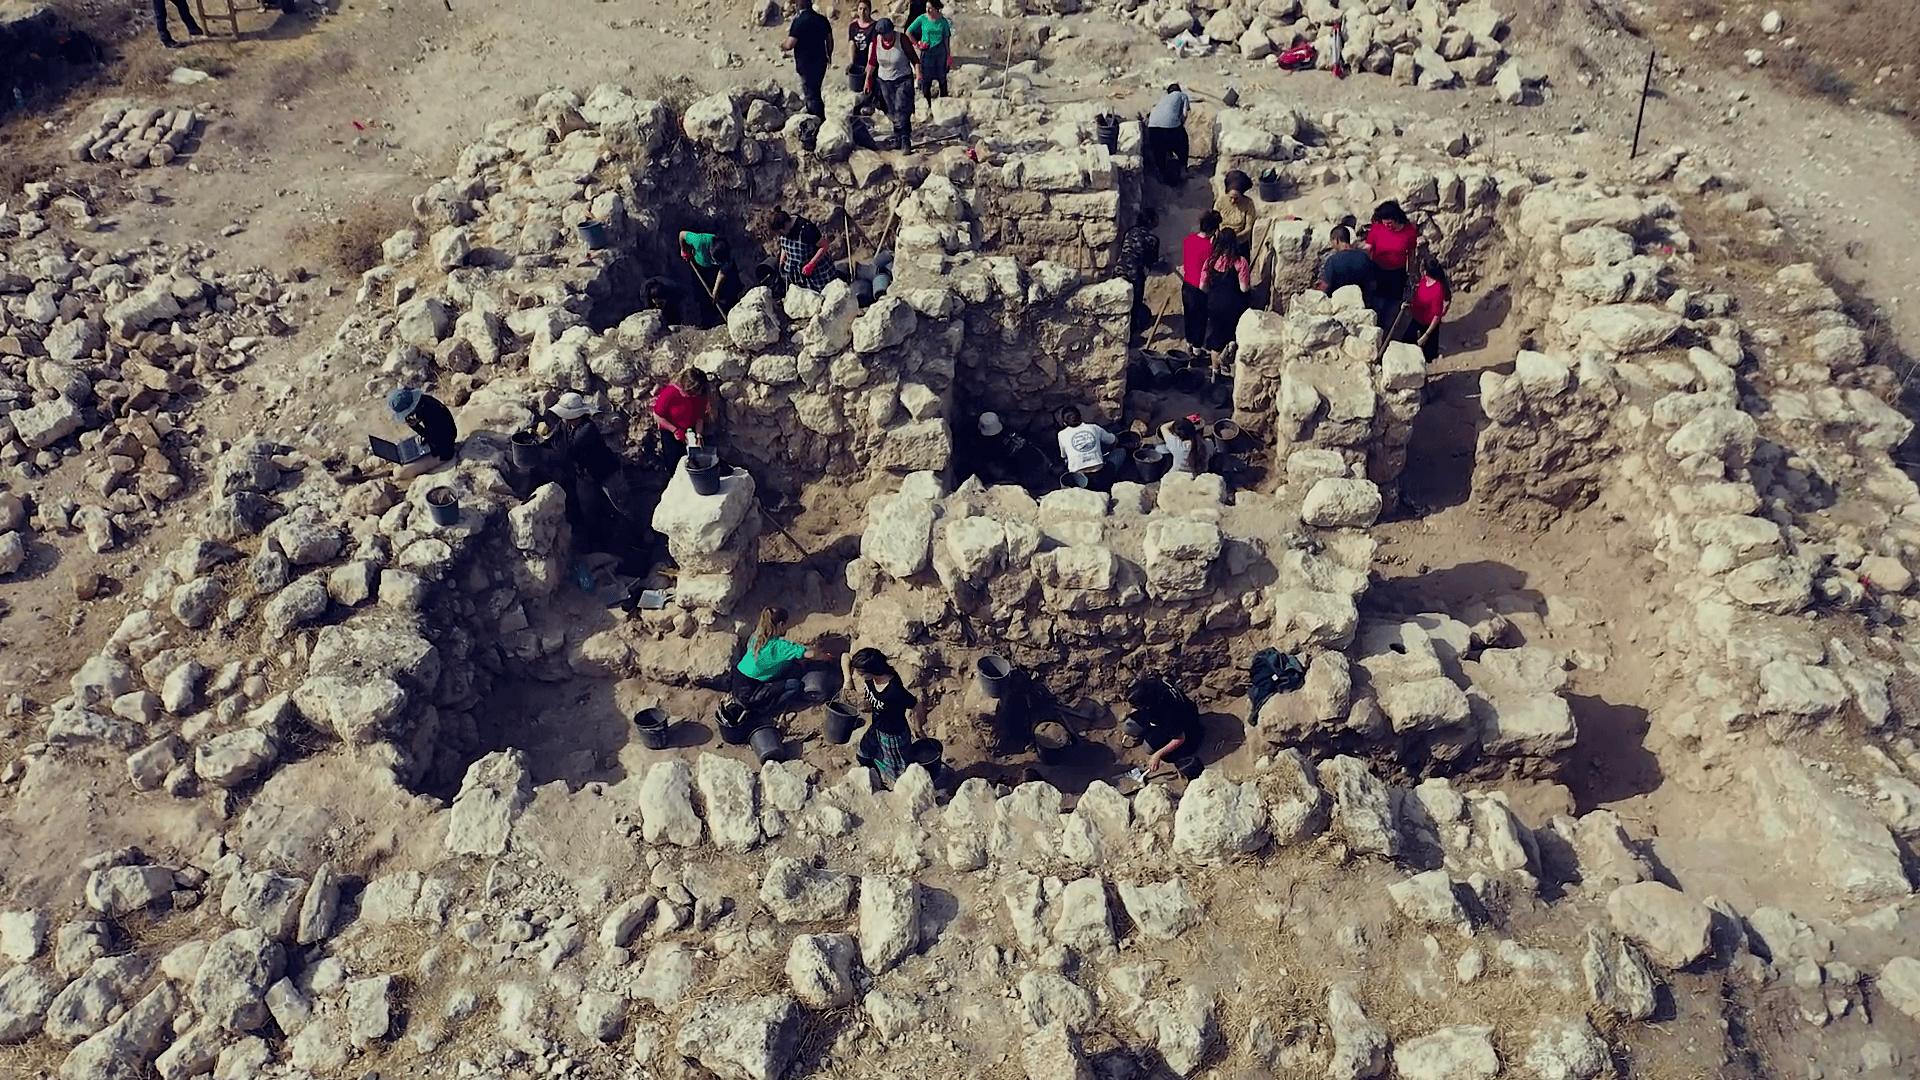 Works in the citadel - aerial view. Photo by Emil Eljam, Antiquities Authority